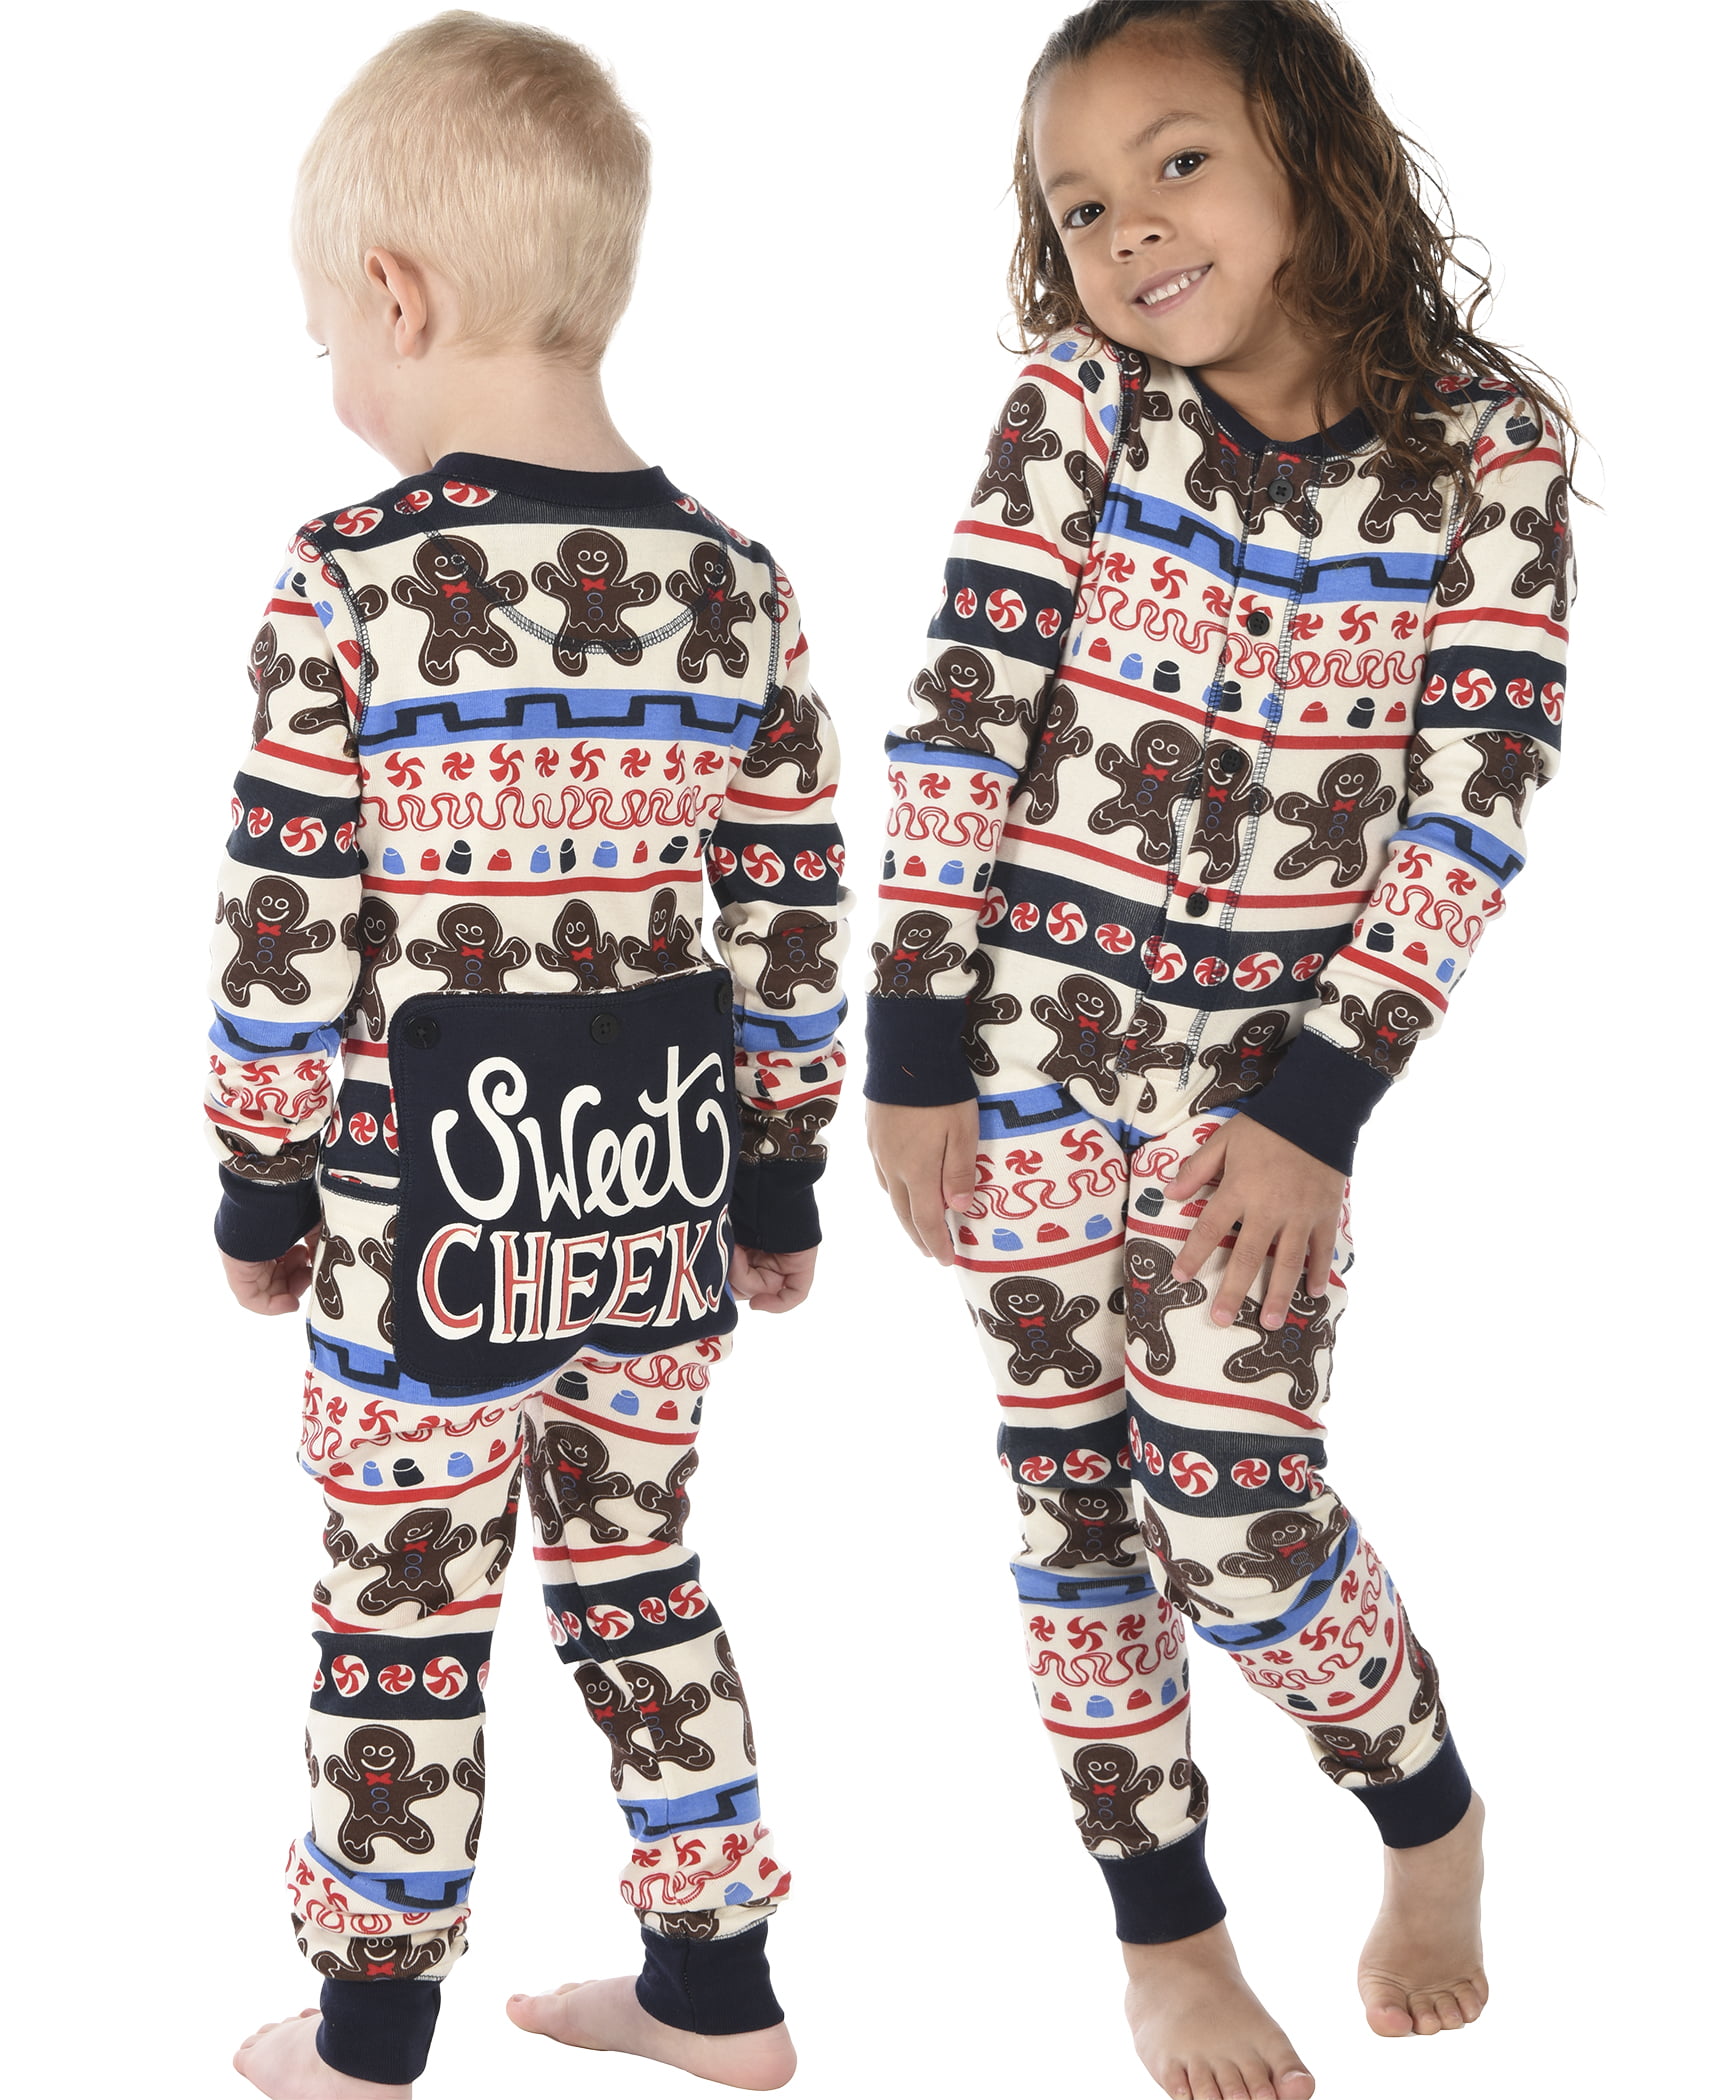 Lazy One Flapjacks Matching Pajamas for The Dog Baby Kids and Adults Teens